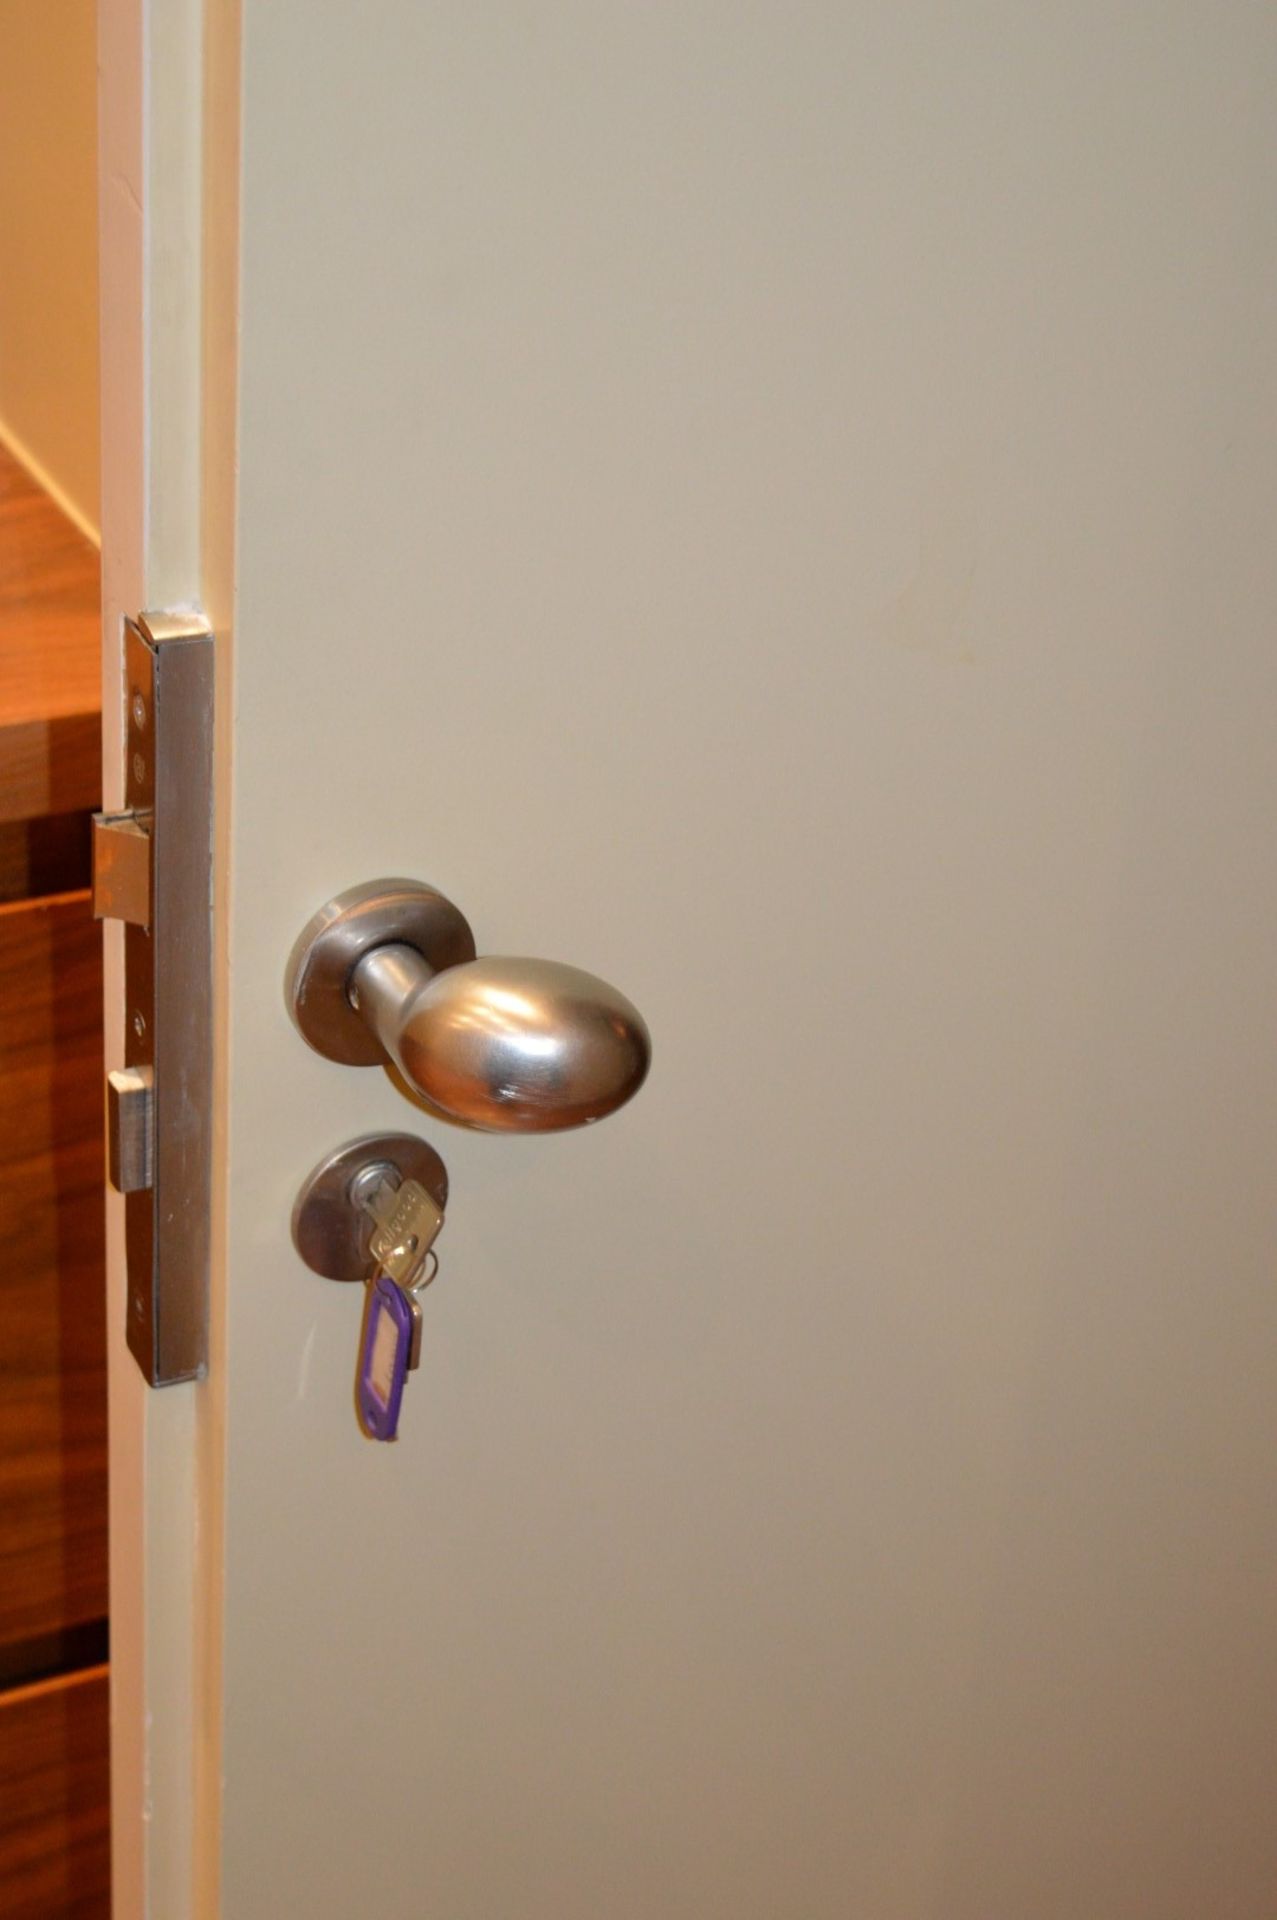 1 x Fire Resistant Internal Door - Fitted With Stylish Chrome Door Knobs, Triple Hinges and Lock - - Image 4 of 5